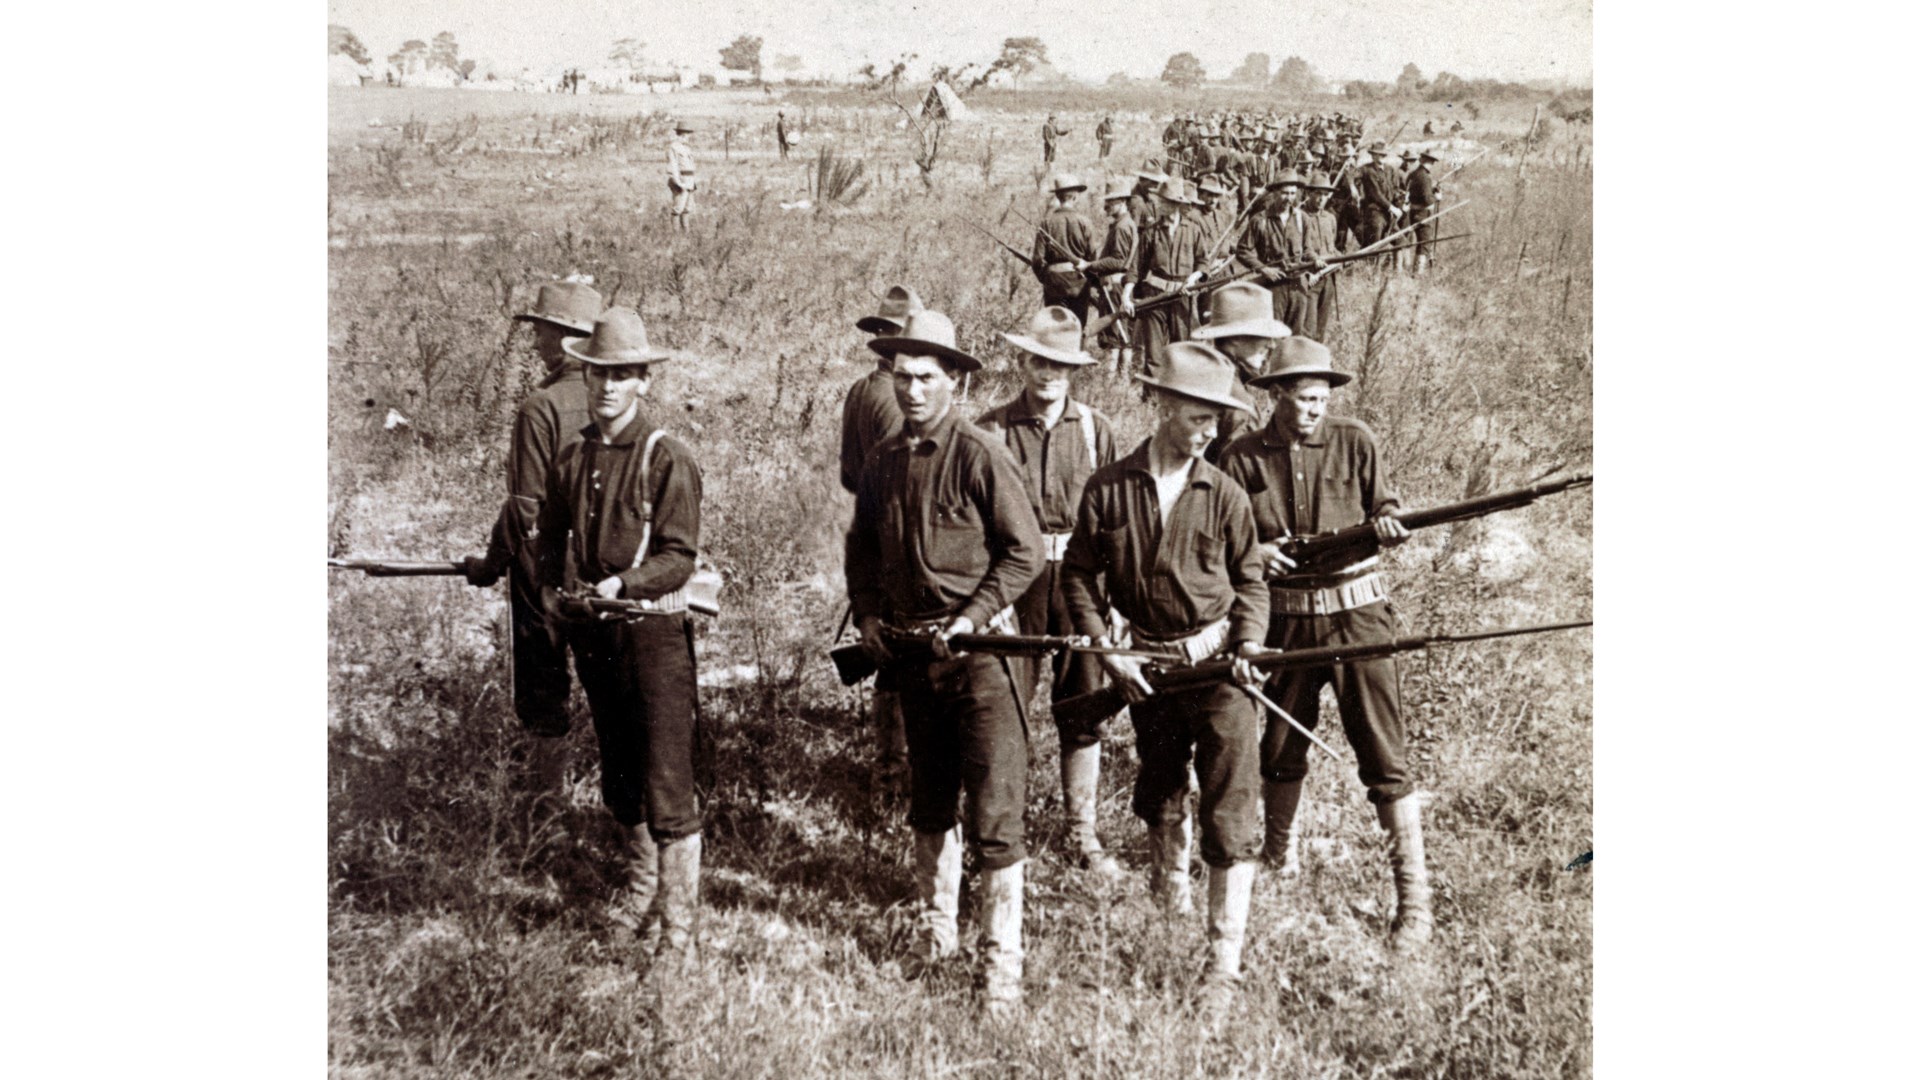 U.S. Army infantrymen with Trapdoor Springfield rifles with fixed bayonets practicing a “defensive line” formation, 1898. Courtesy of Tom Laemlein.